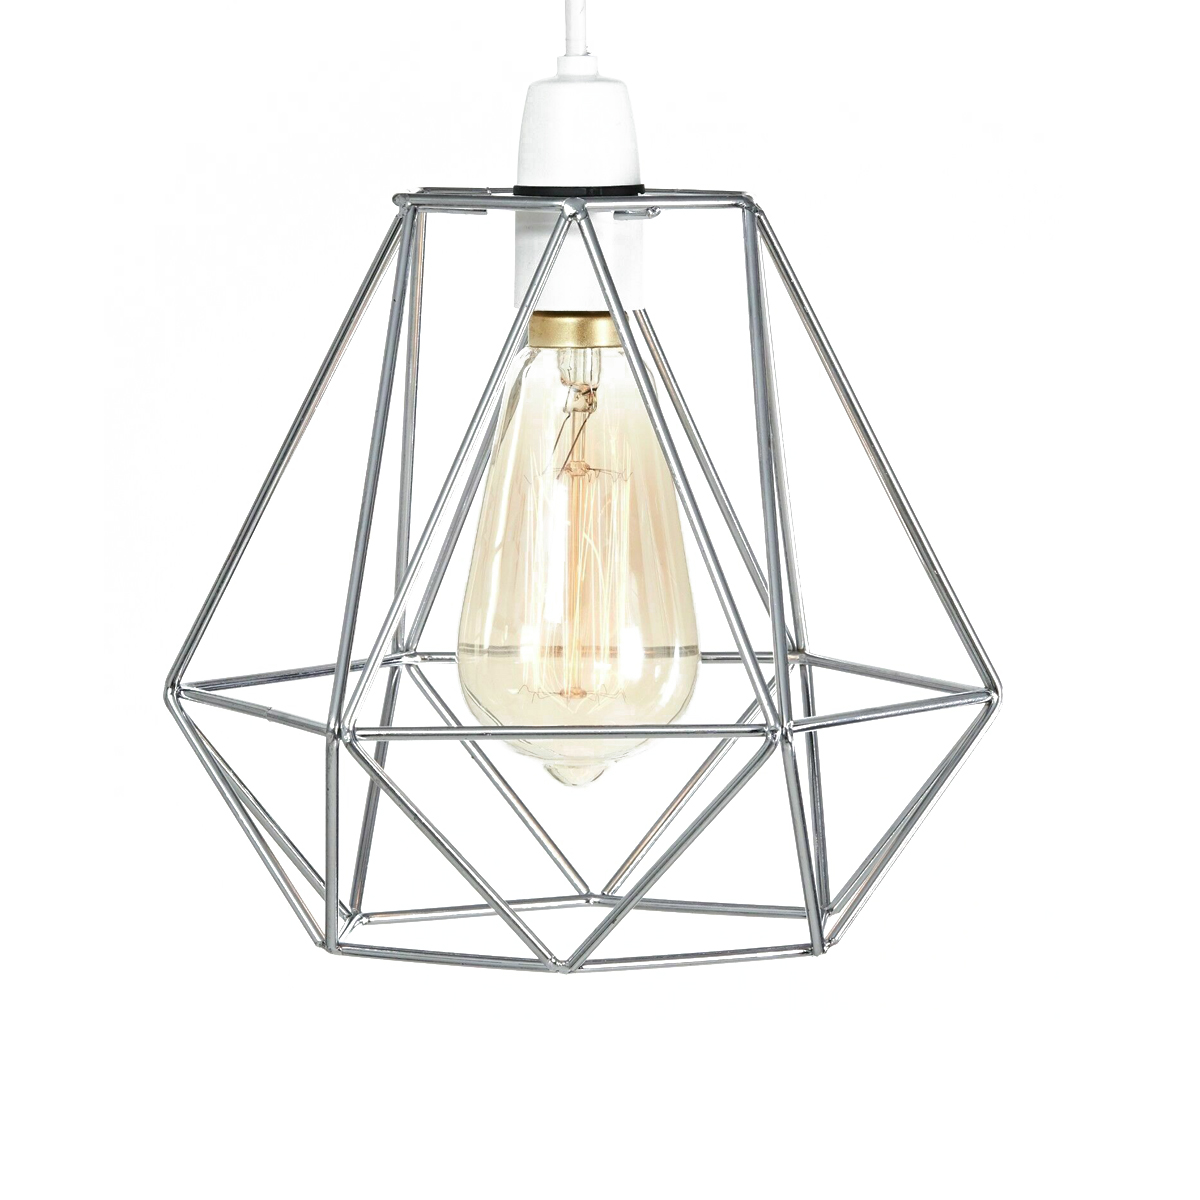 Geometric-Wire-Ceiling-Pendant-Light-Lampshade-Metal-Cage-Kitchen-Dining-Cafe-Without-Bulb-1758739-5